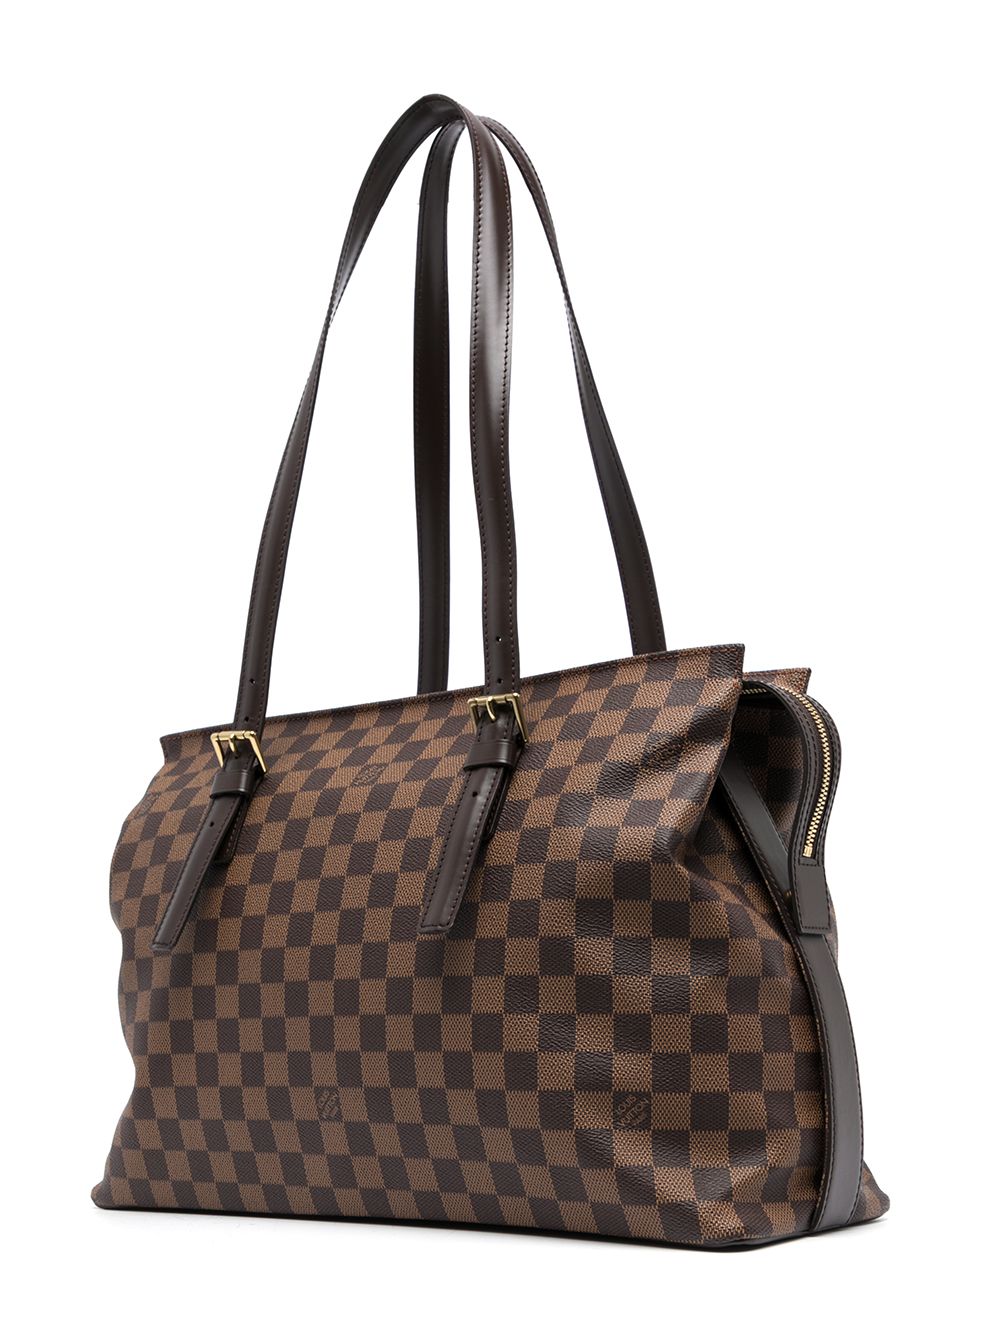 Louis Vuitton 2003 pre-owned Chelsea Tote Bag - Farfetch